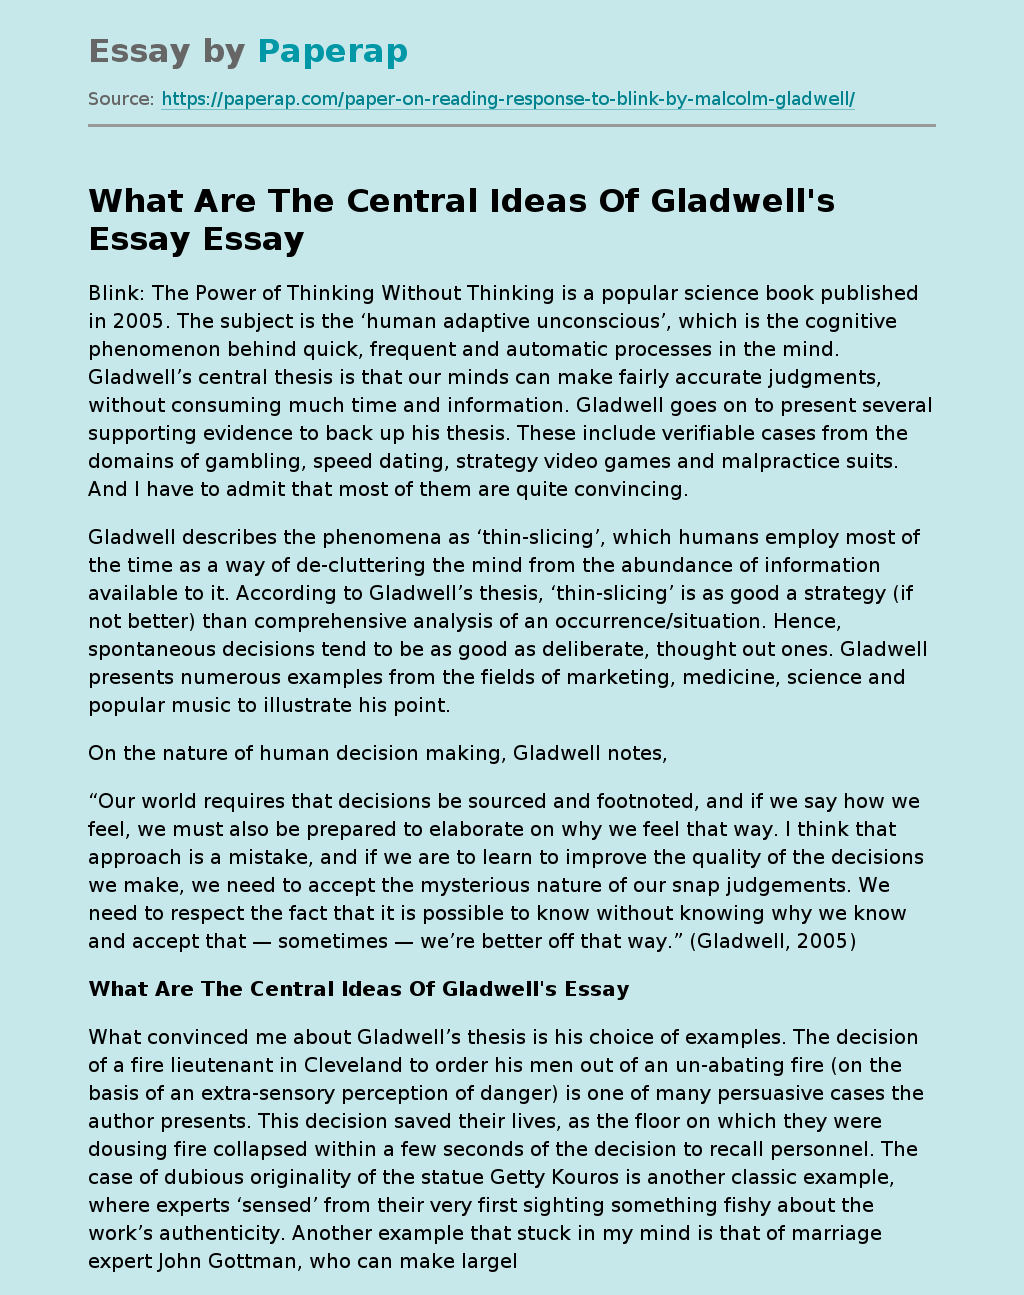 What Are The Central Ideas Of Gladwell's Essay